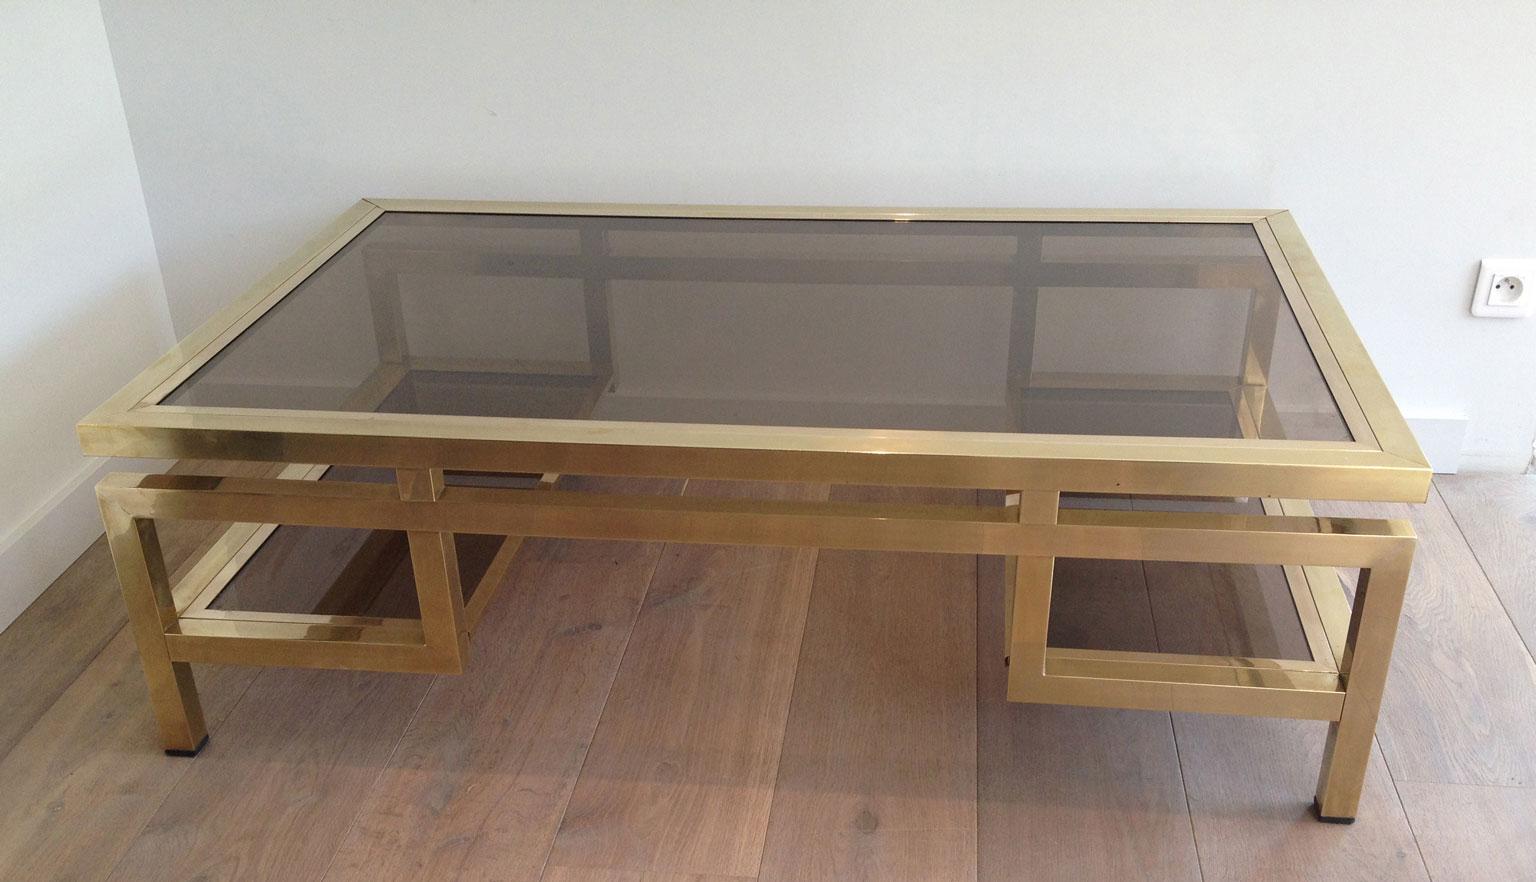 This rare important design coffee table is made of brass with smoked glass shelves. This is a work by famous French designer Guy Lefèvre for Maison Jansen. Circa 1970.